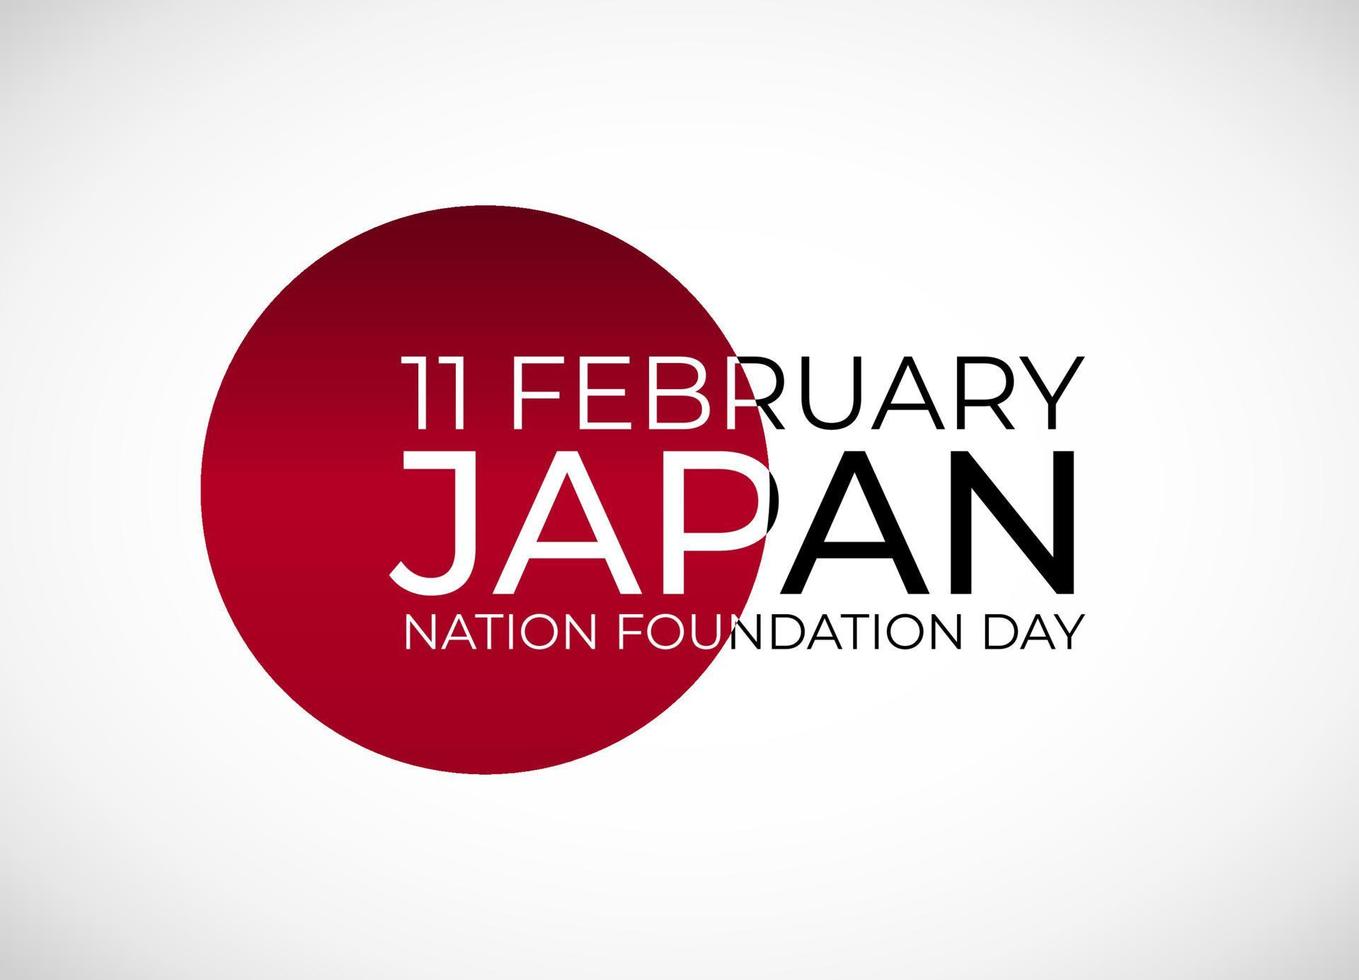 11 february  Japan nation foundation day  background vector